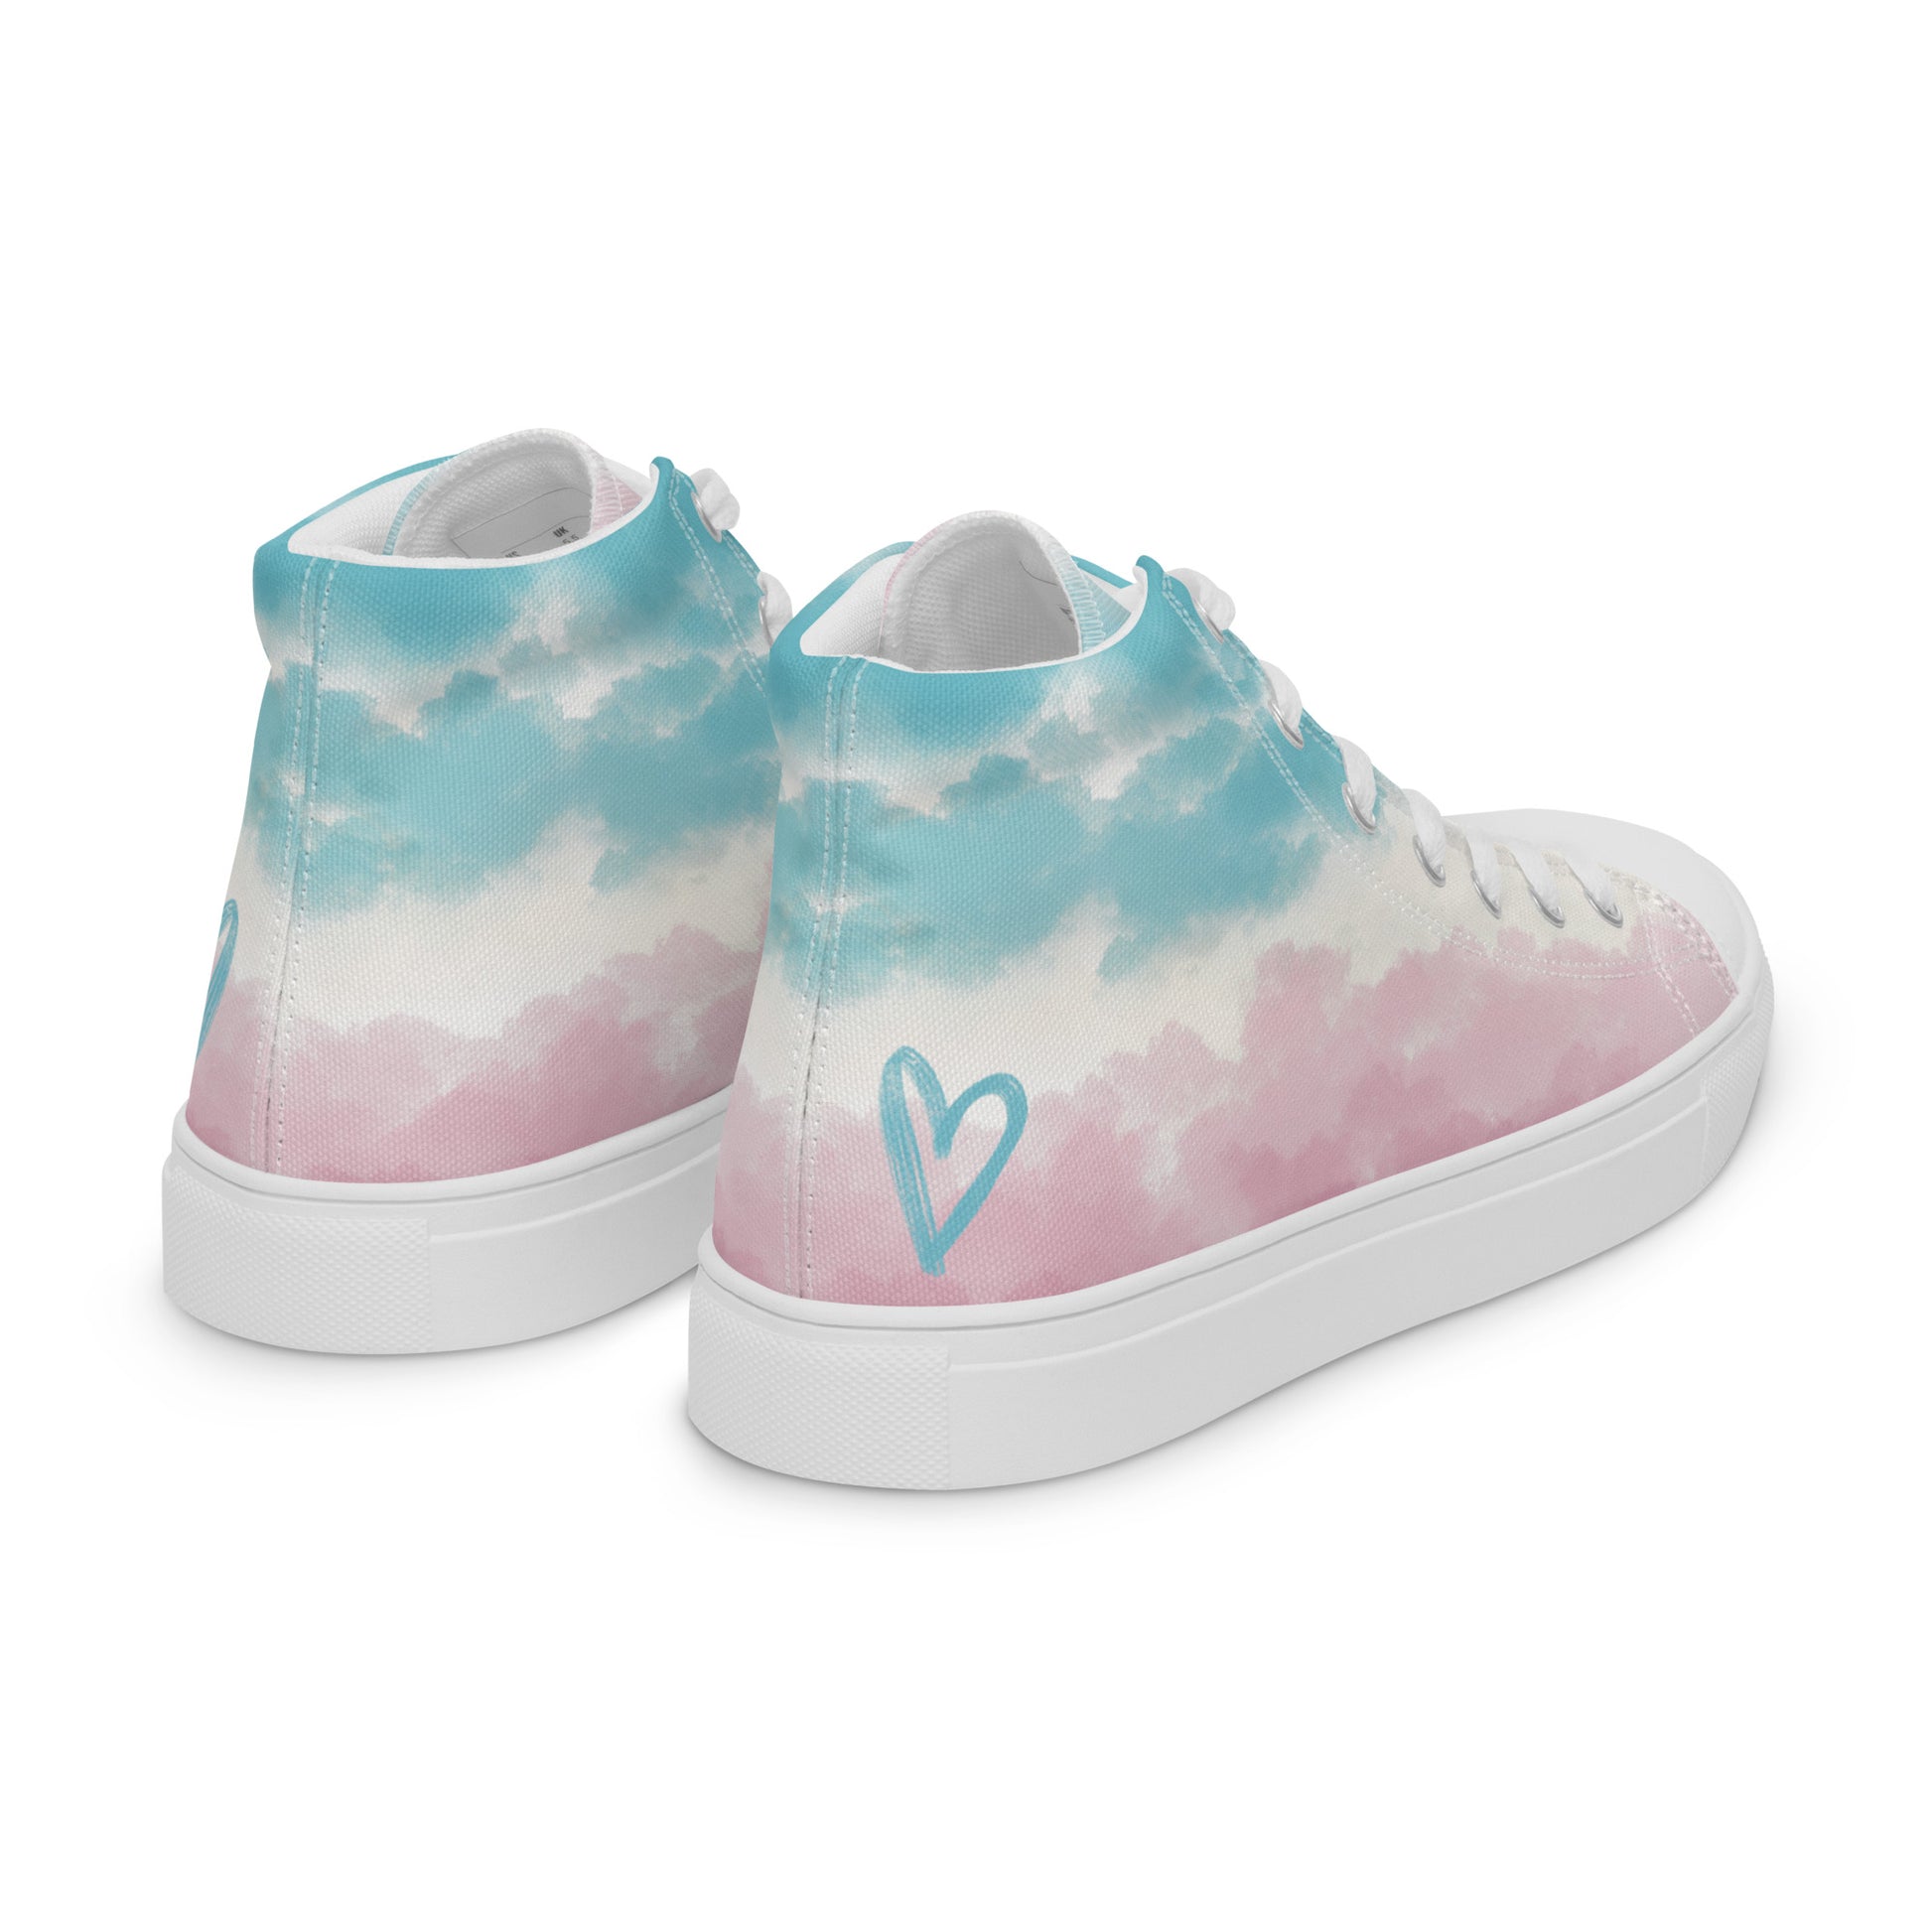 Right back view: High top shoes with a cloudy design in blue, white, and pink has a doodle style heart on the heel, white shoe laces, and white details.